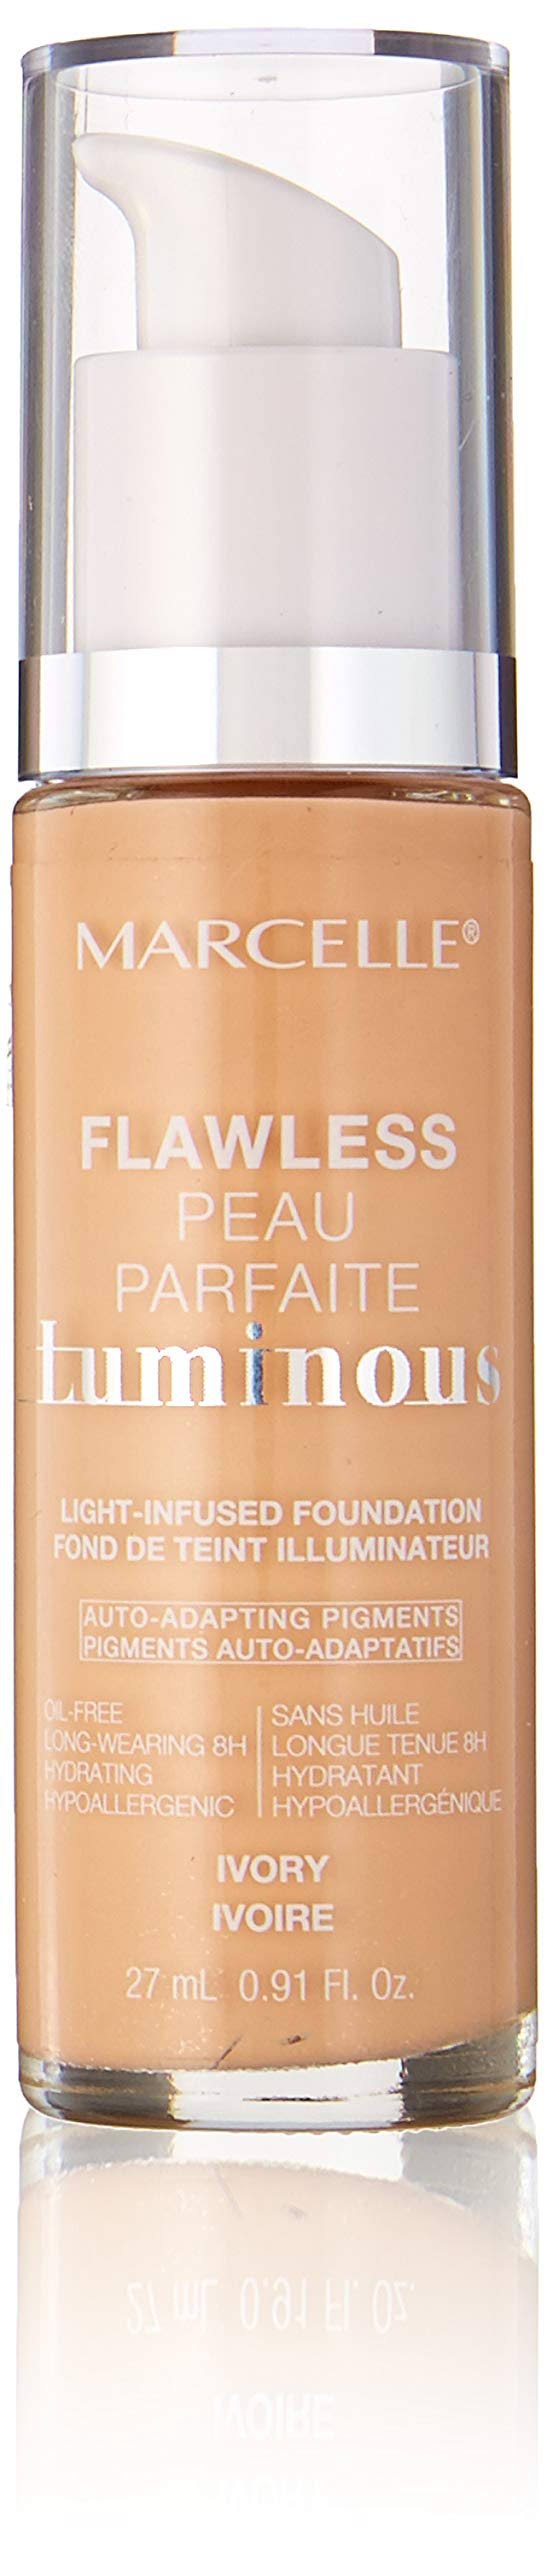 Marcelle Flawless Luminous Foundation, Ivory, Hypoallergenic and Fragrance-Free, 0.91 fl oz 164596